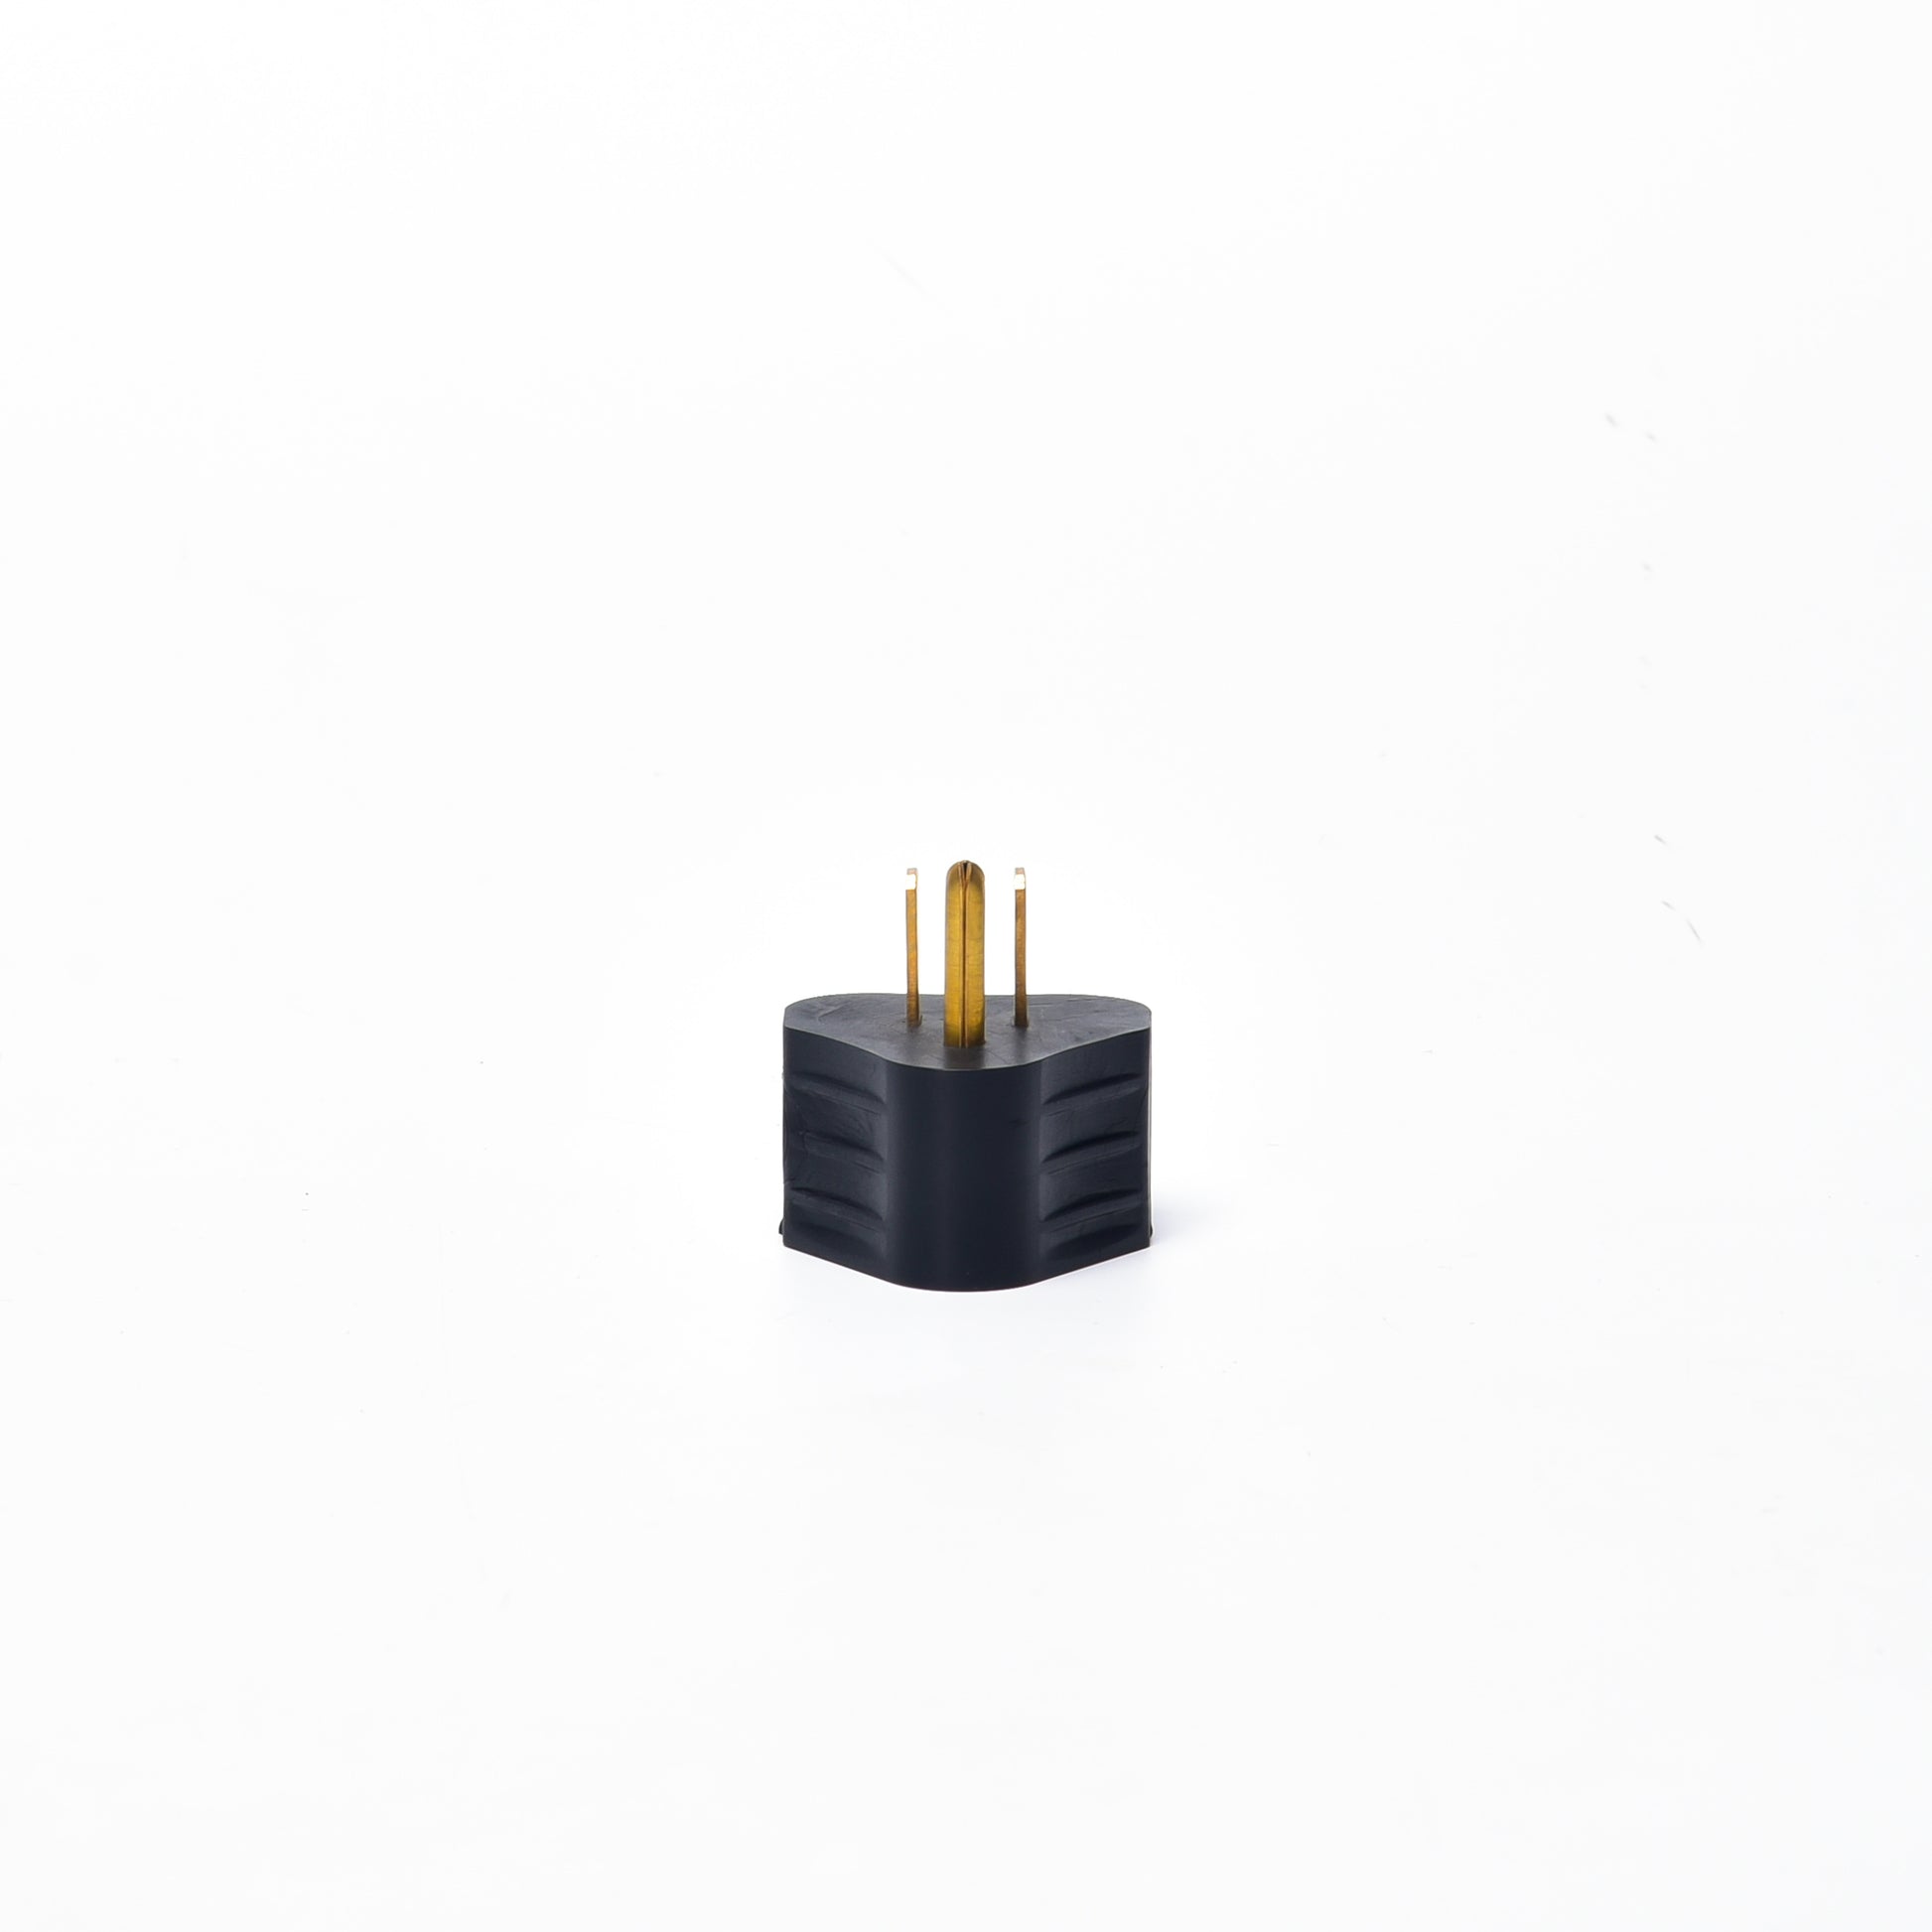 TrekPower Adapter Plug 15A Male to 30A Female